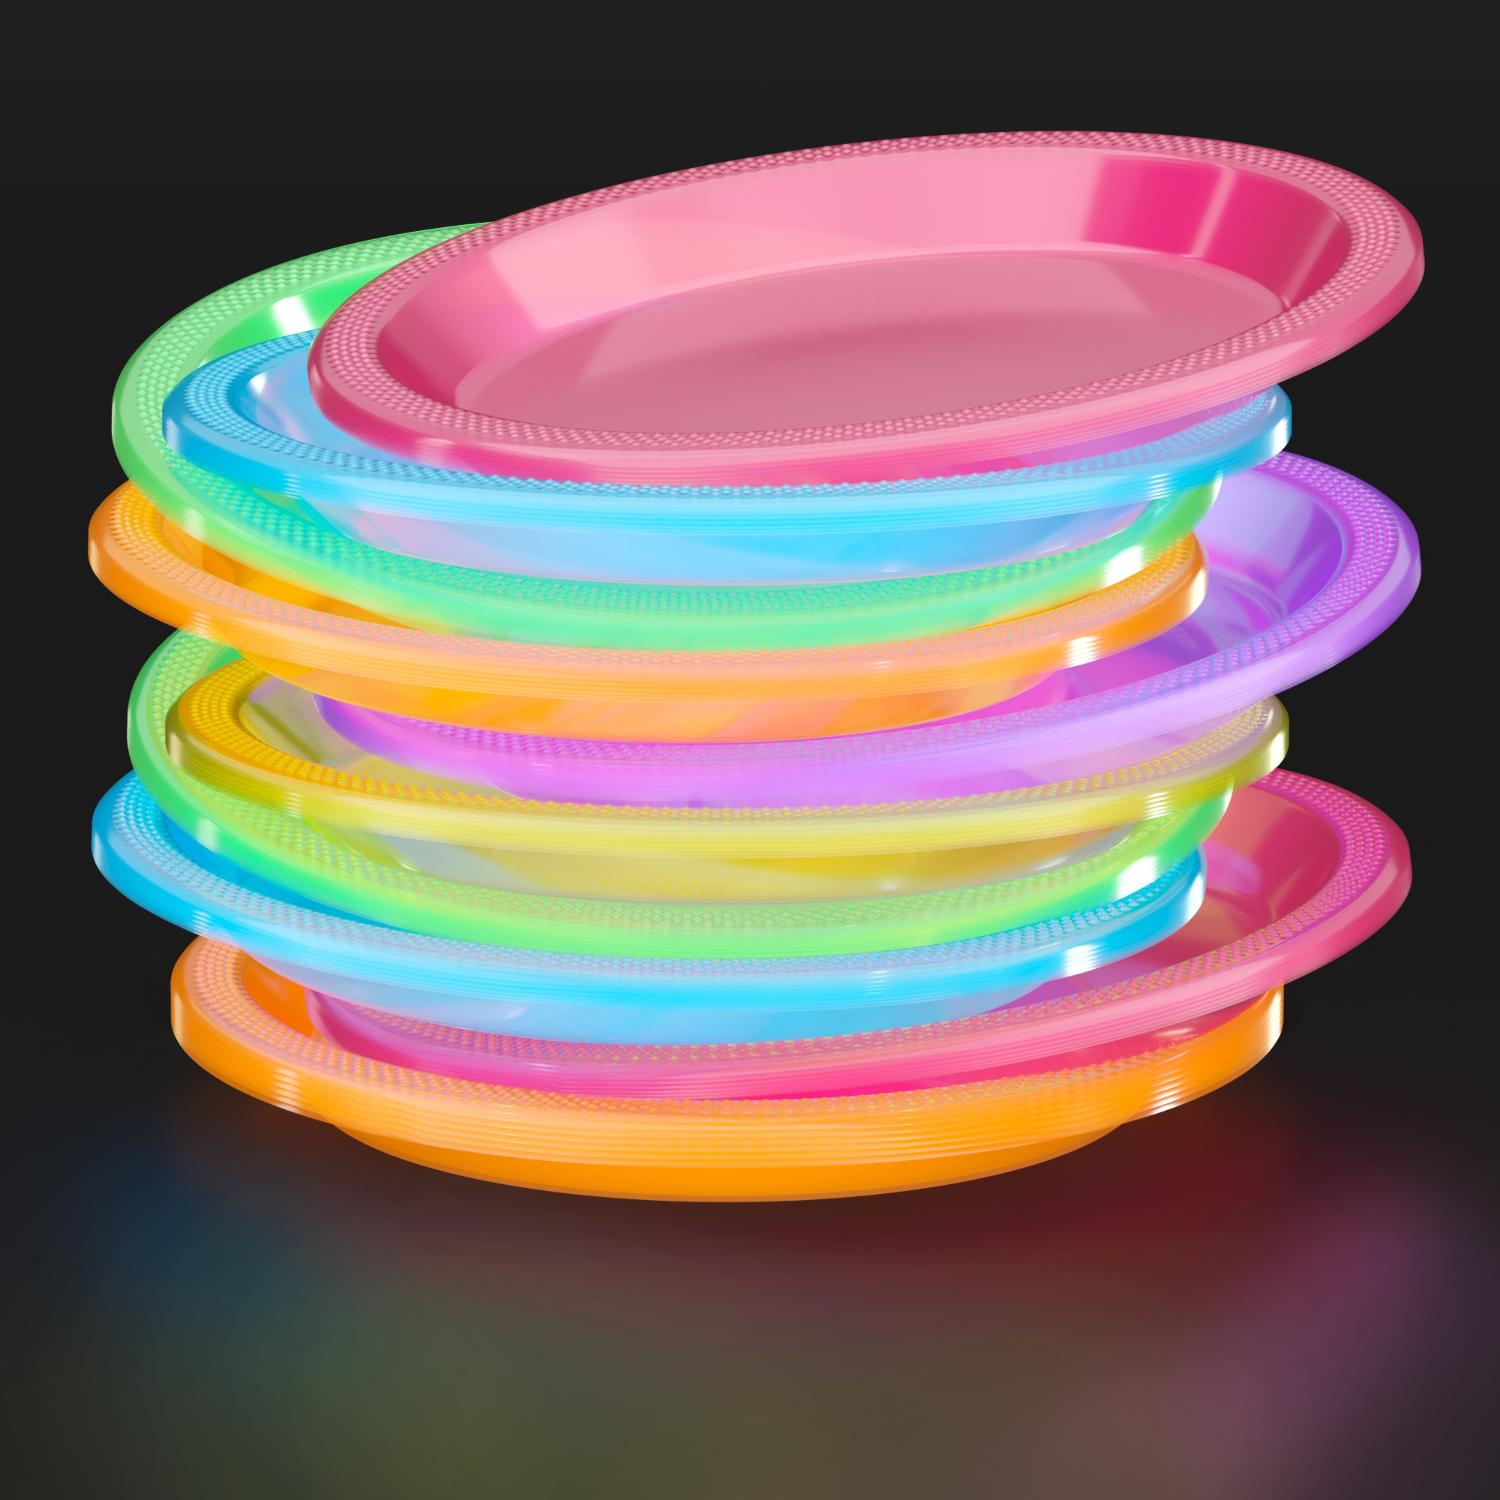 Assorted Neon Glow 9 in. Plates - 720 Count